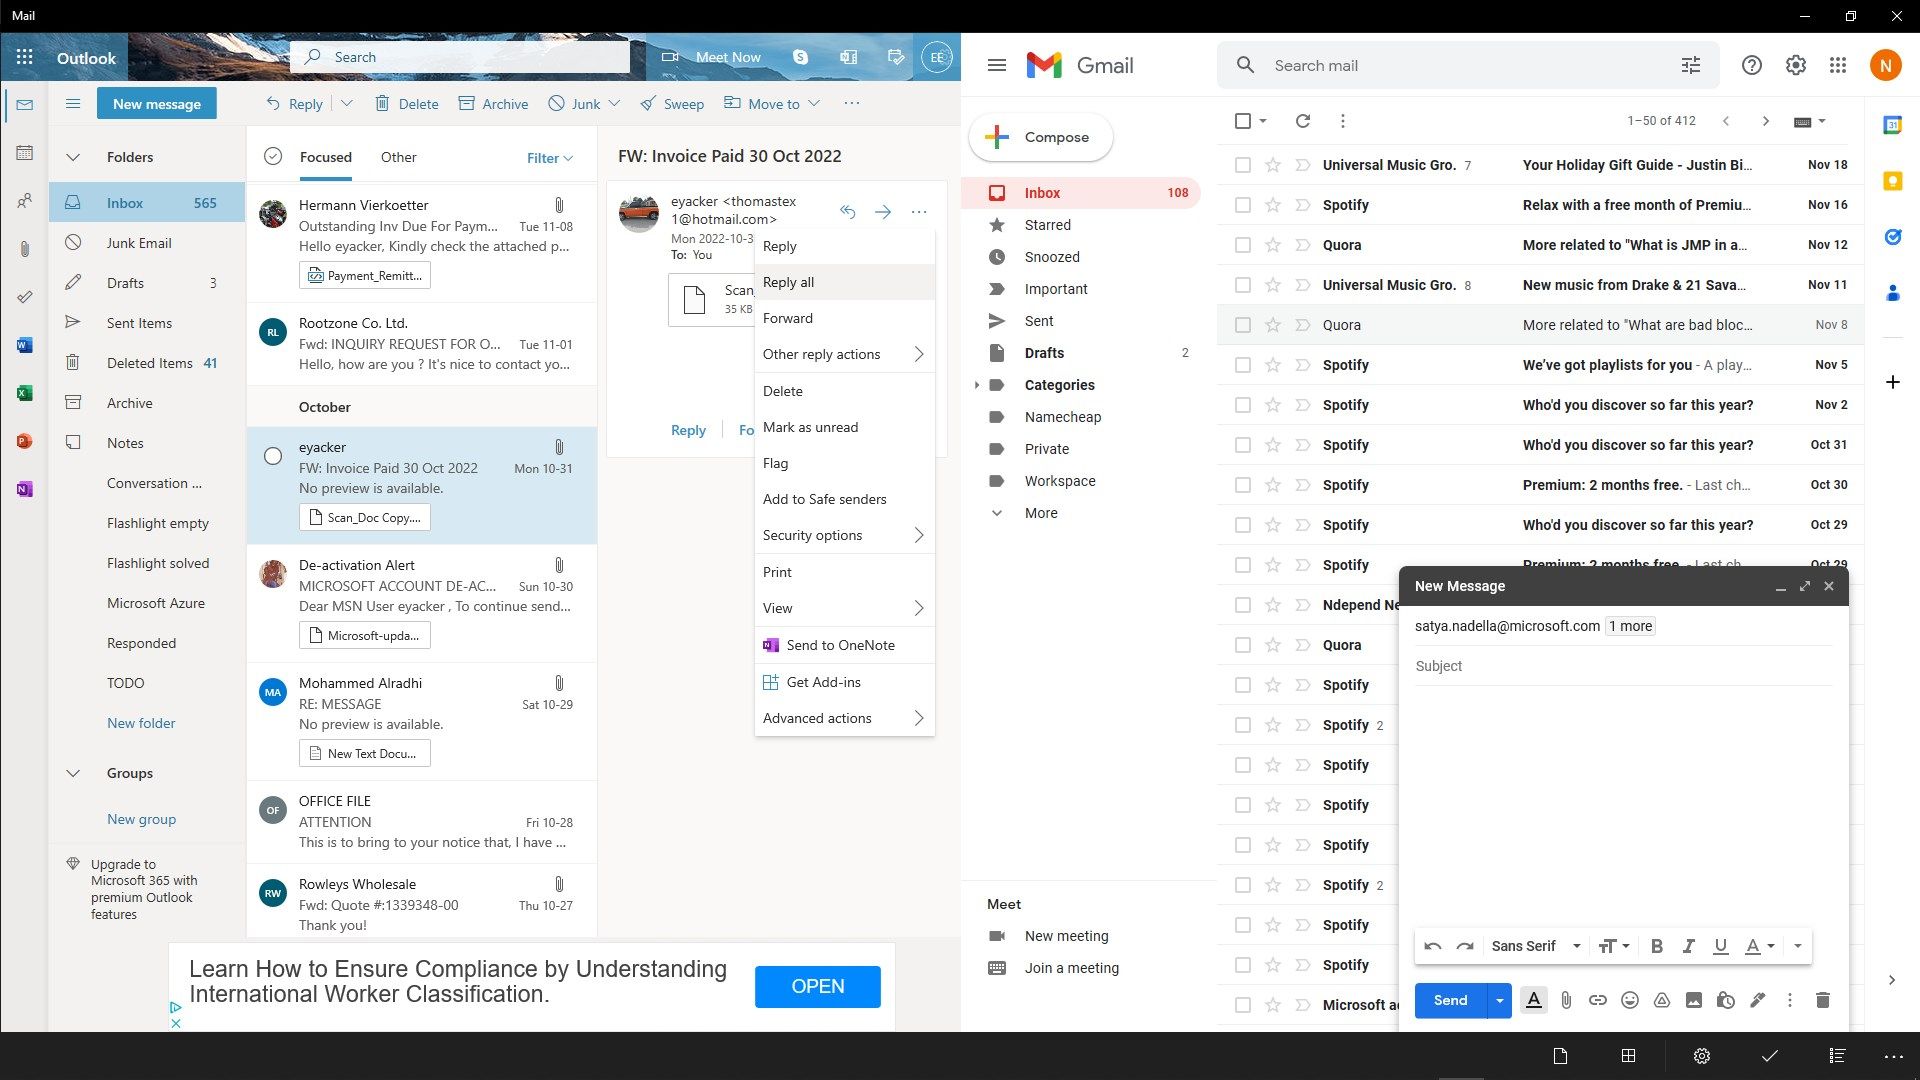 Two page split view mode with Outlook and Gmail accounts parallel